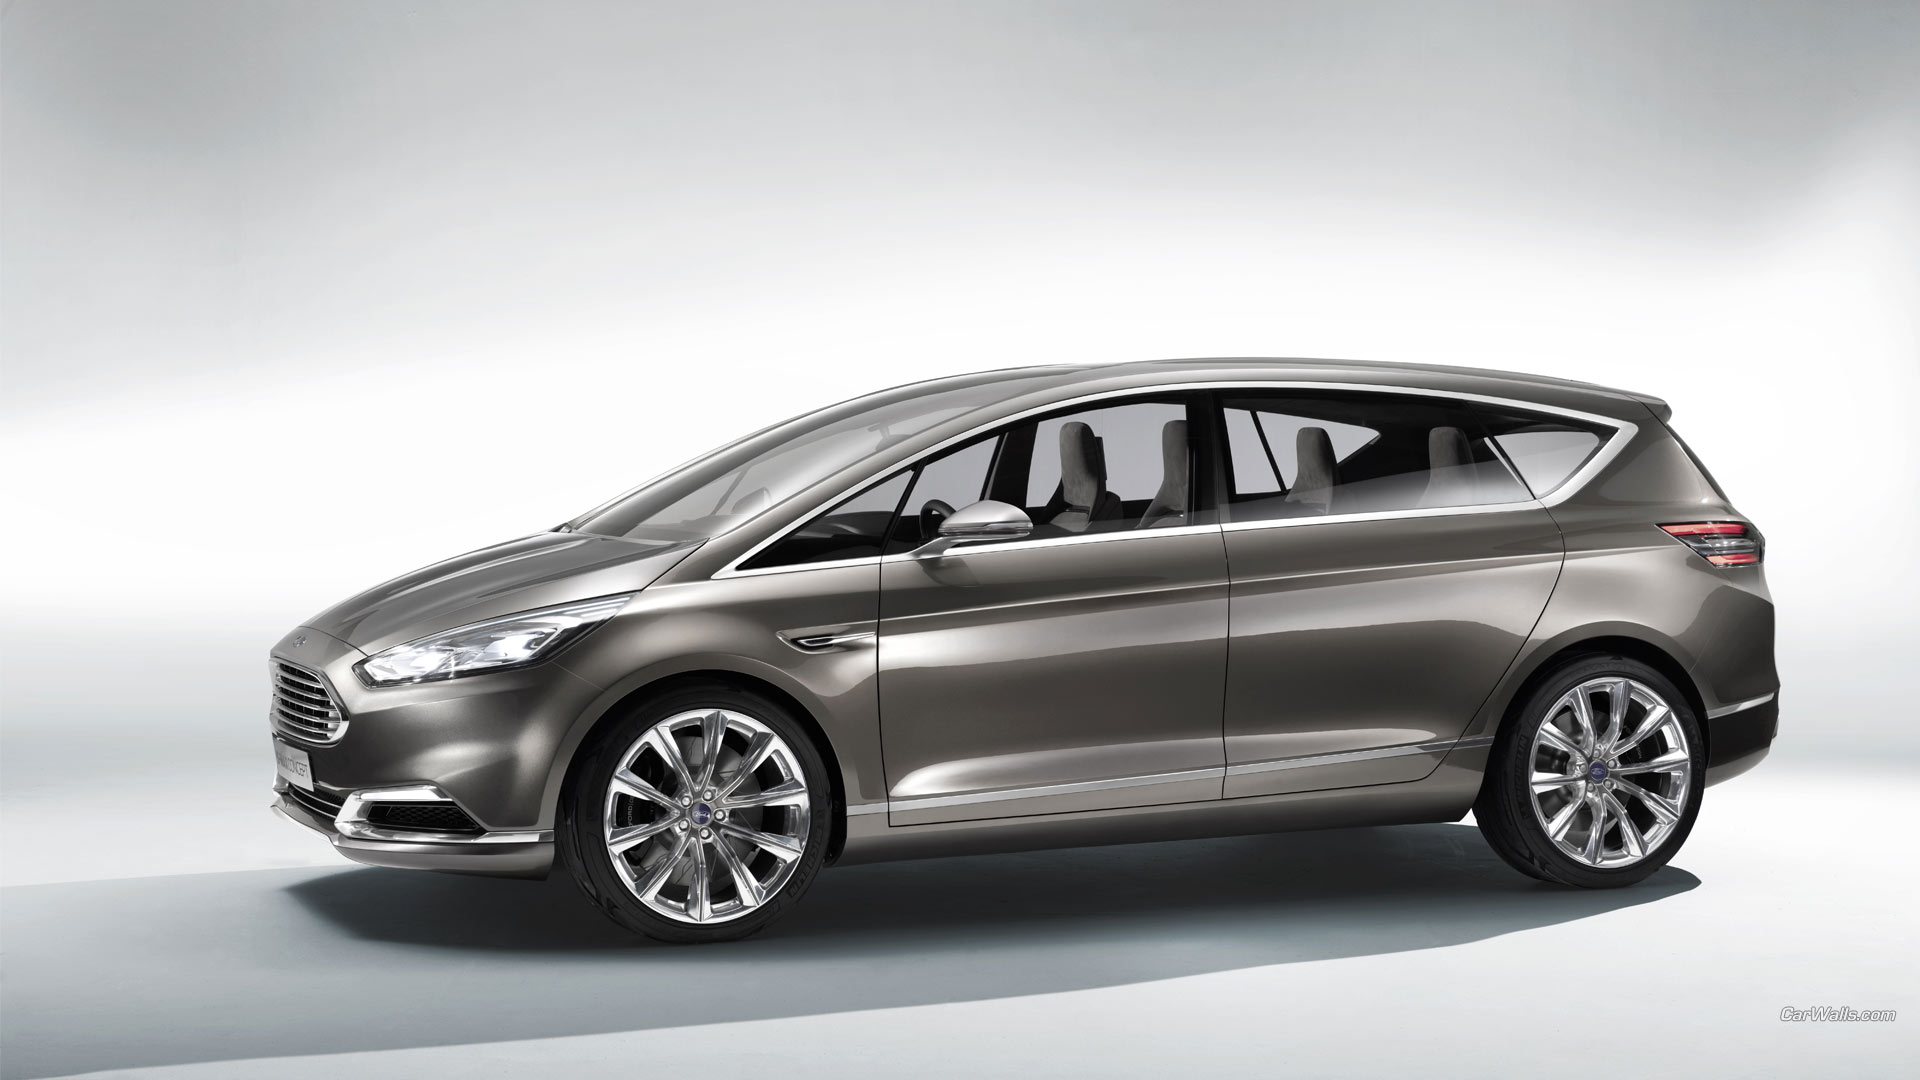 Vehicles 2013 Ford S-MAX Concept HD Wallpaper | Background Image